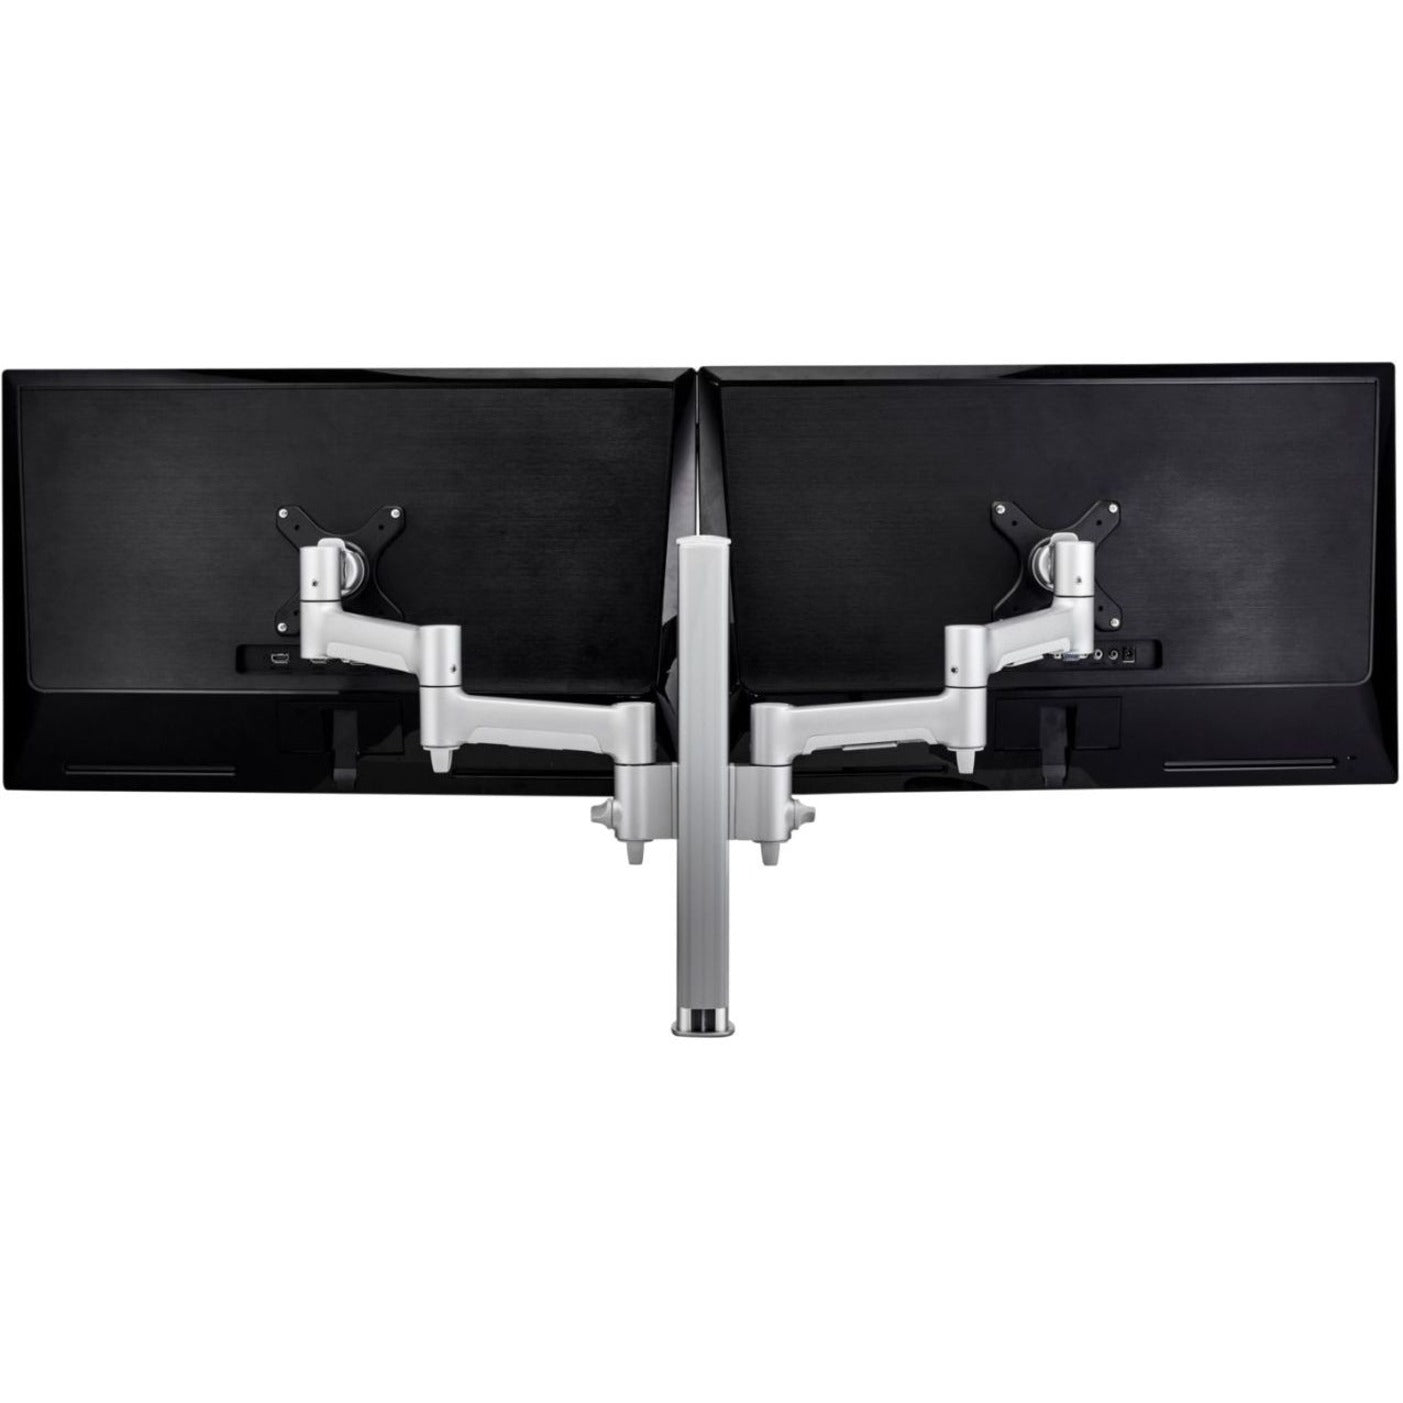 Atdec AWMS-2-4640-F-S 400mm post with two 460mm monitor arms, Desk Mount, Load: 0-12kg